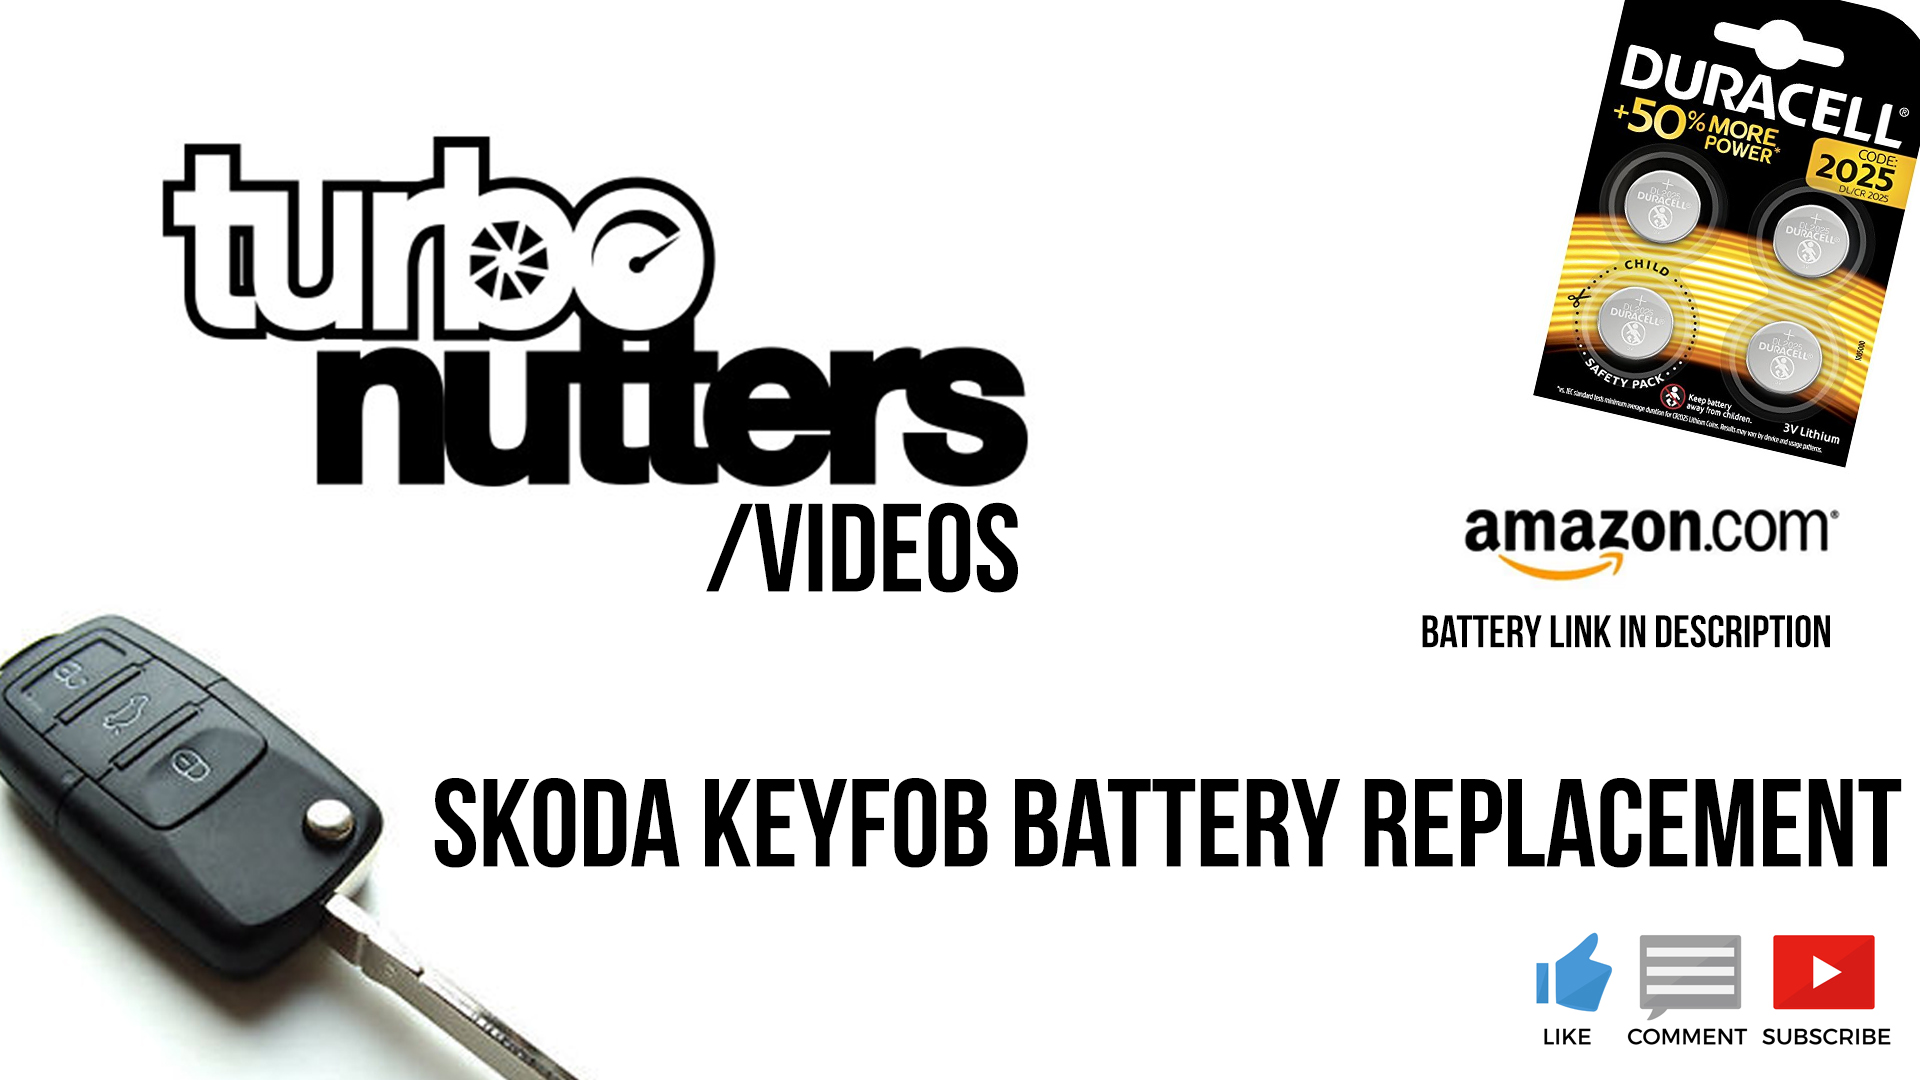 HOW TO: Change the keyfob battery in your Skoda Octavia / VW Golf Seat / Audi -